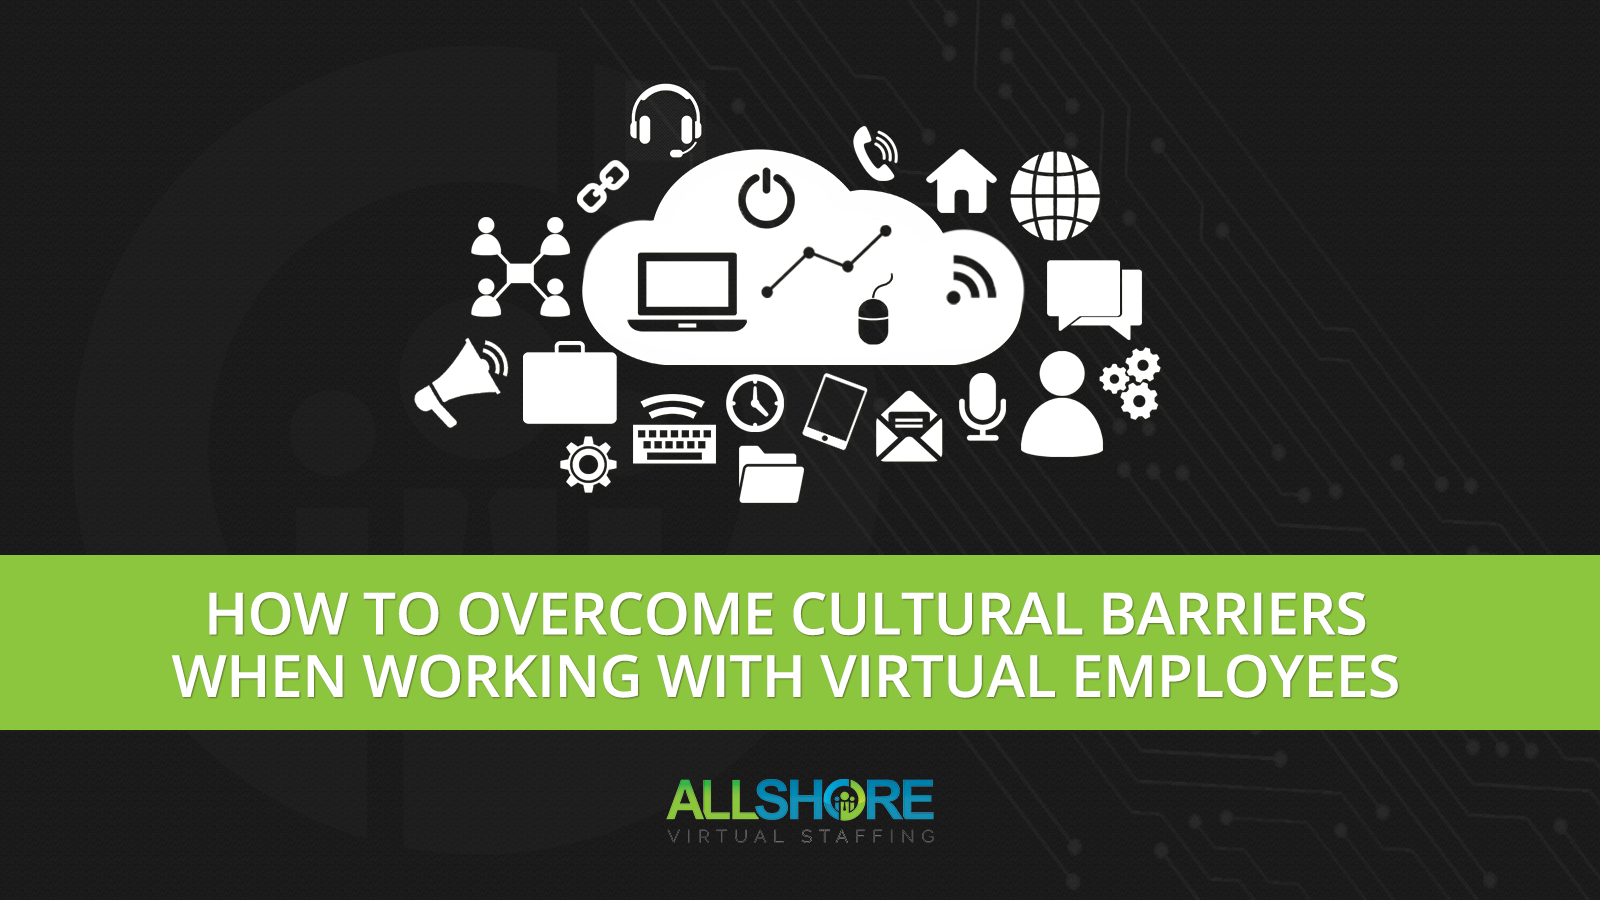 How to Overcome Cultural Barriers When Working with Virtual Employees